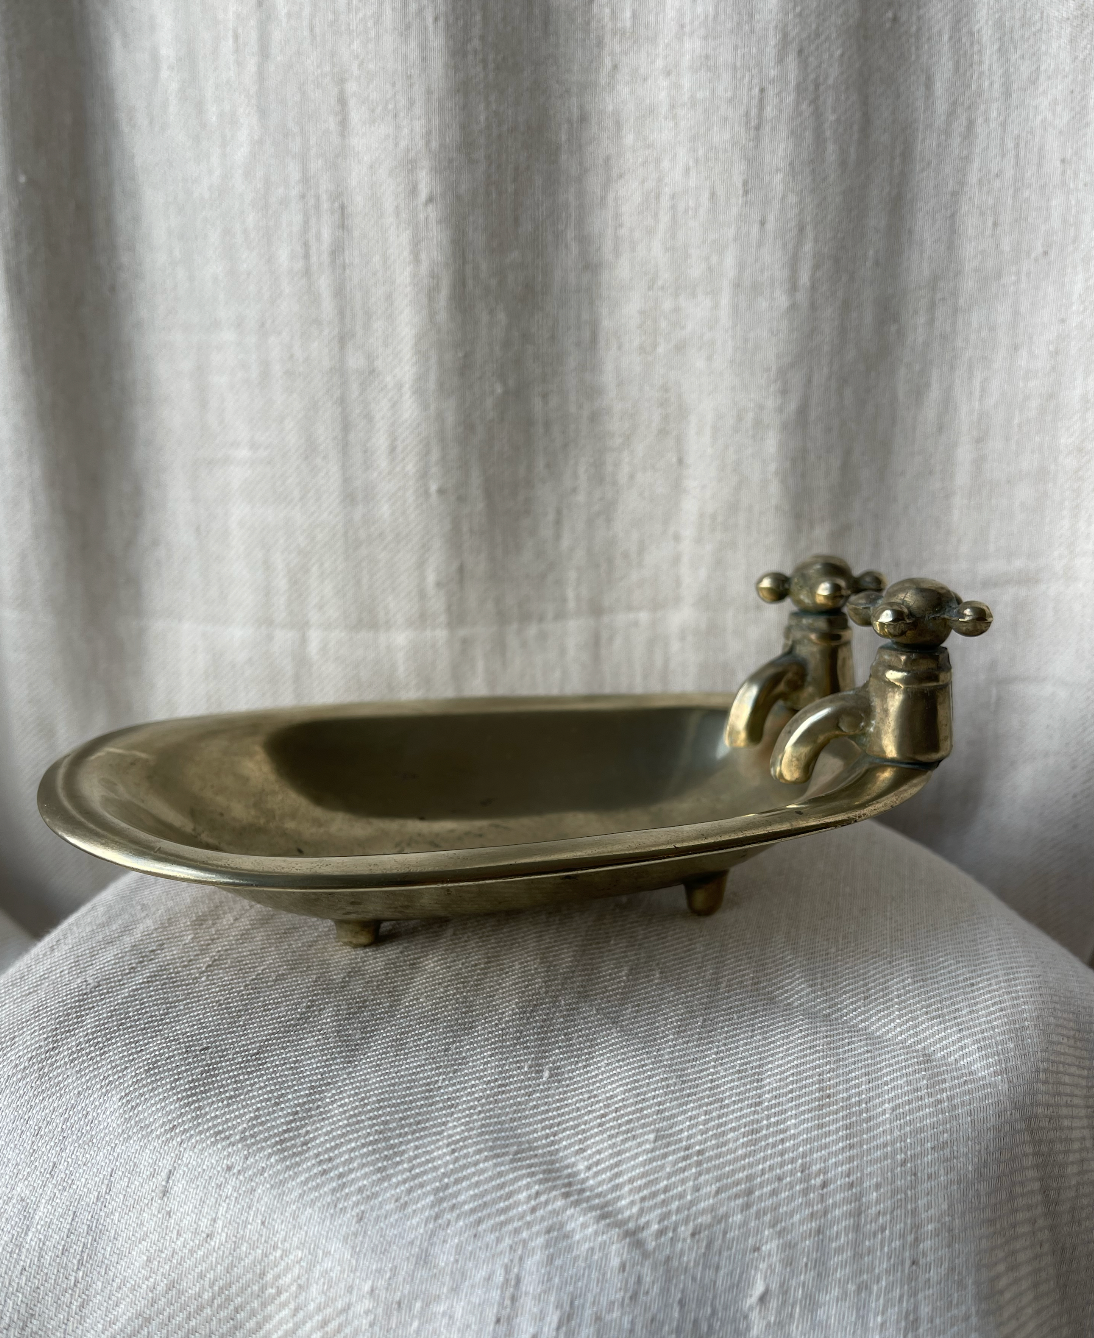 Vintage brass soap dish with taps